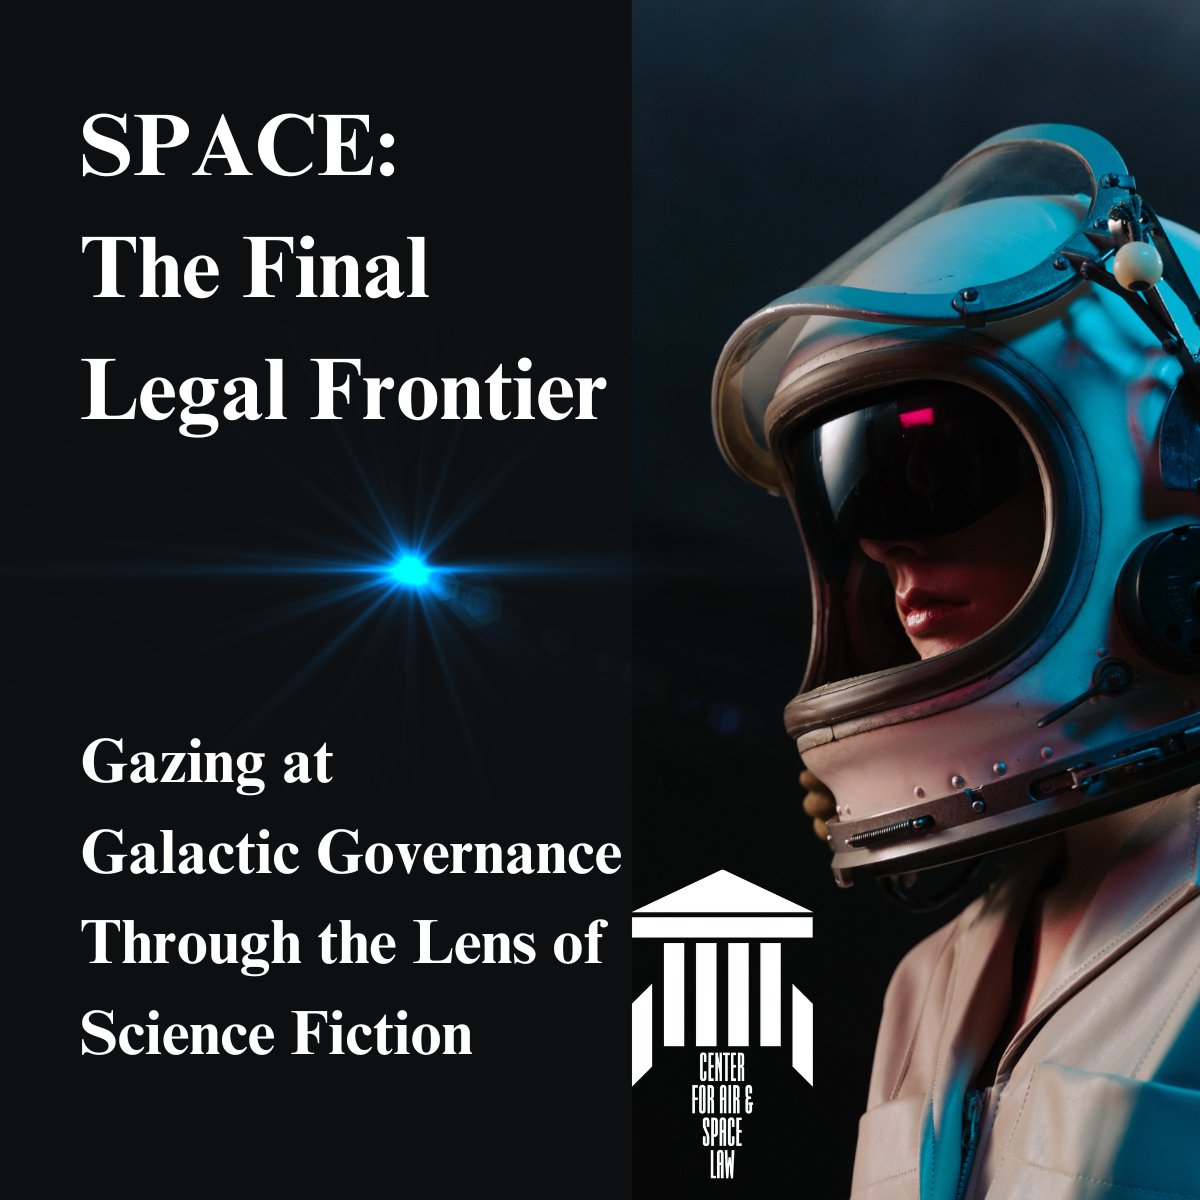 The Journal of Space Law: Science Fiction Edition is welcoming submissions that explore outer space law through science fiction books, movies, and TV. Papers should be no more than 25,000 words, including footnotes. Submit your papers by July 31, 2024 to aclewis5@olemiss.edu.